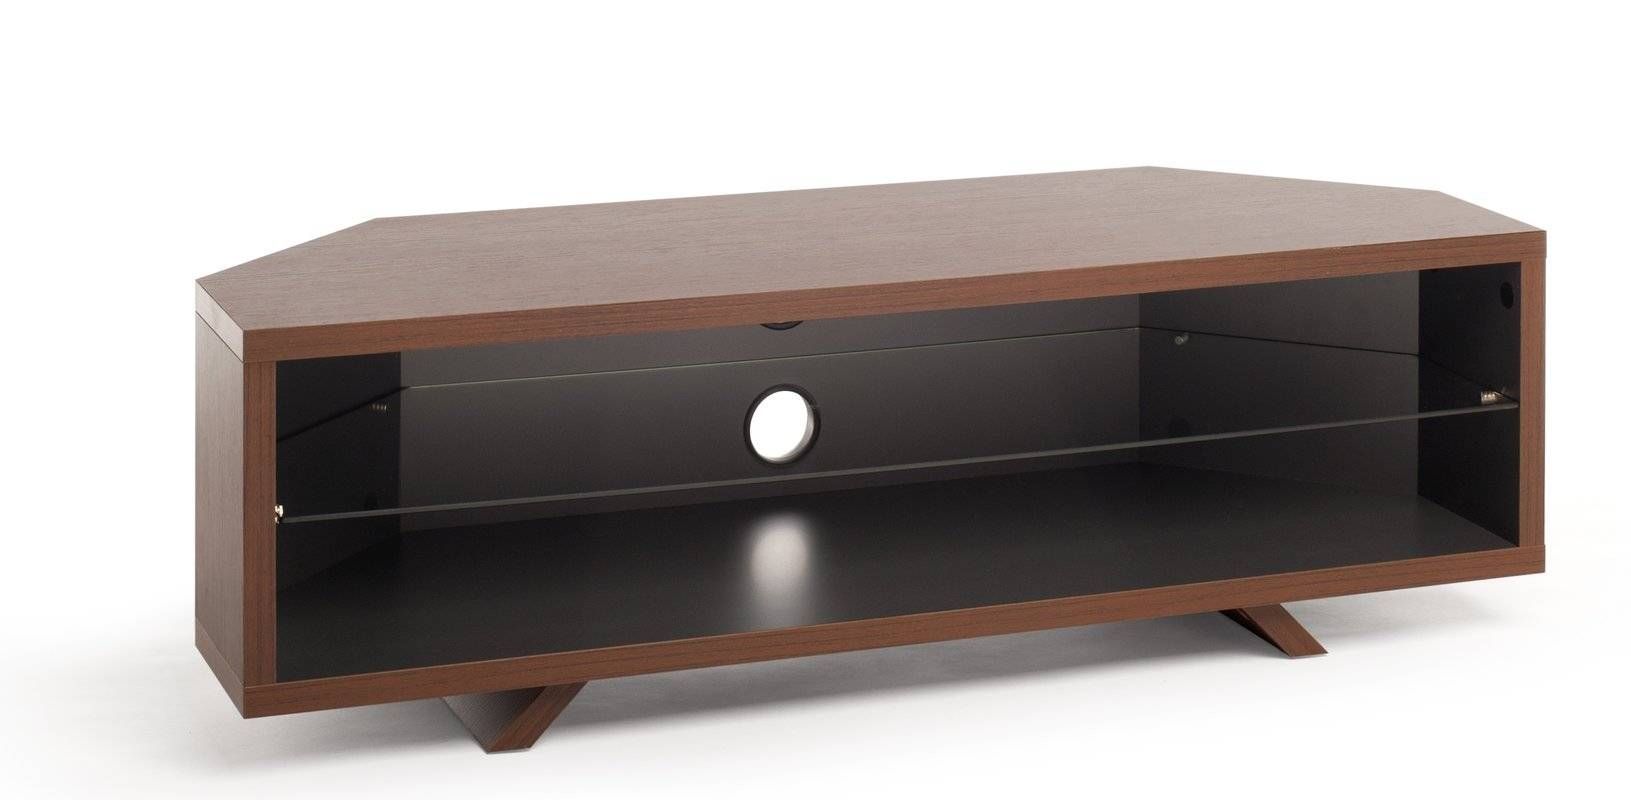 Techlink Bench Corner Tv Stand | Home Design Inspirations Regarding Techlink Bench Corner Tv Stands (View 10 of 15)